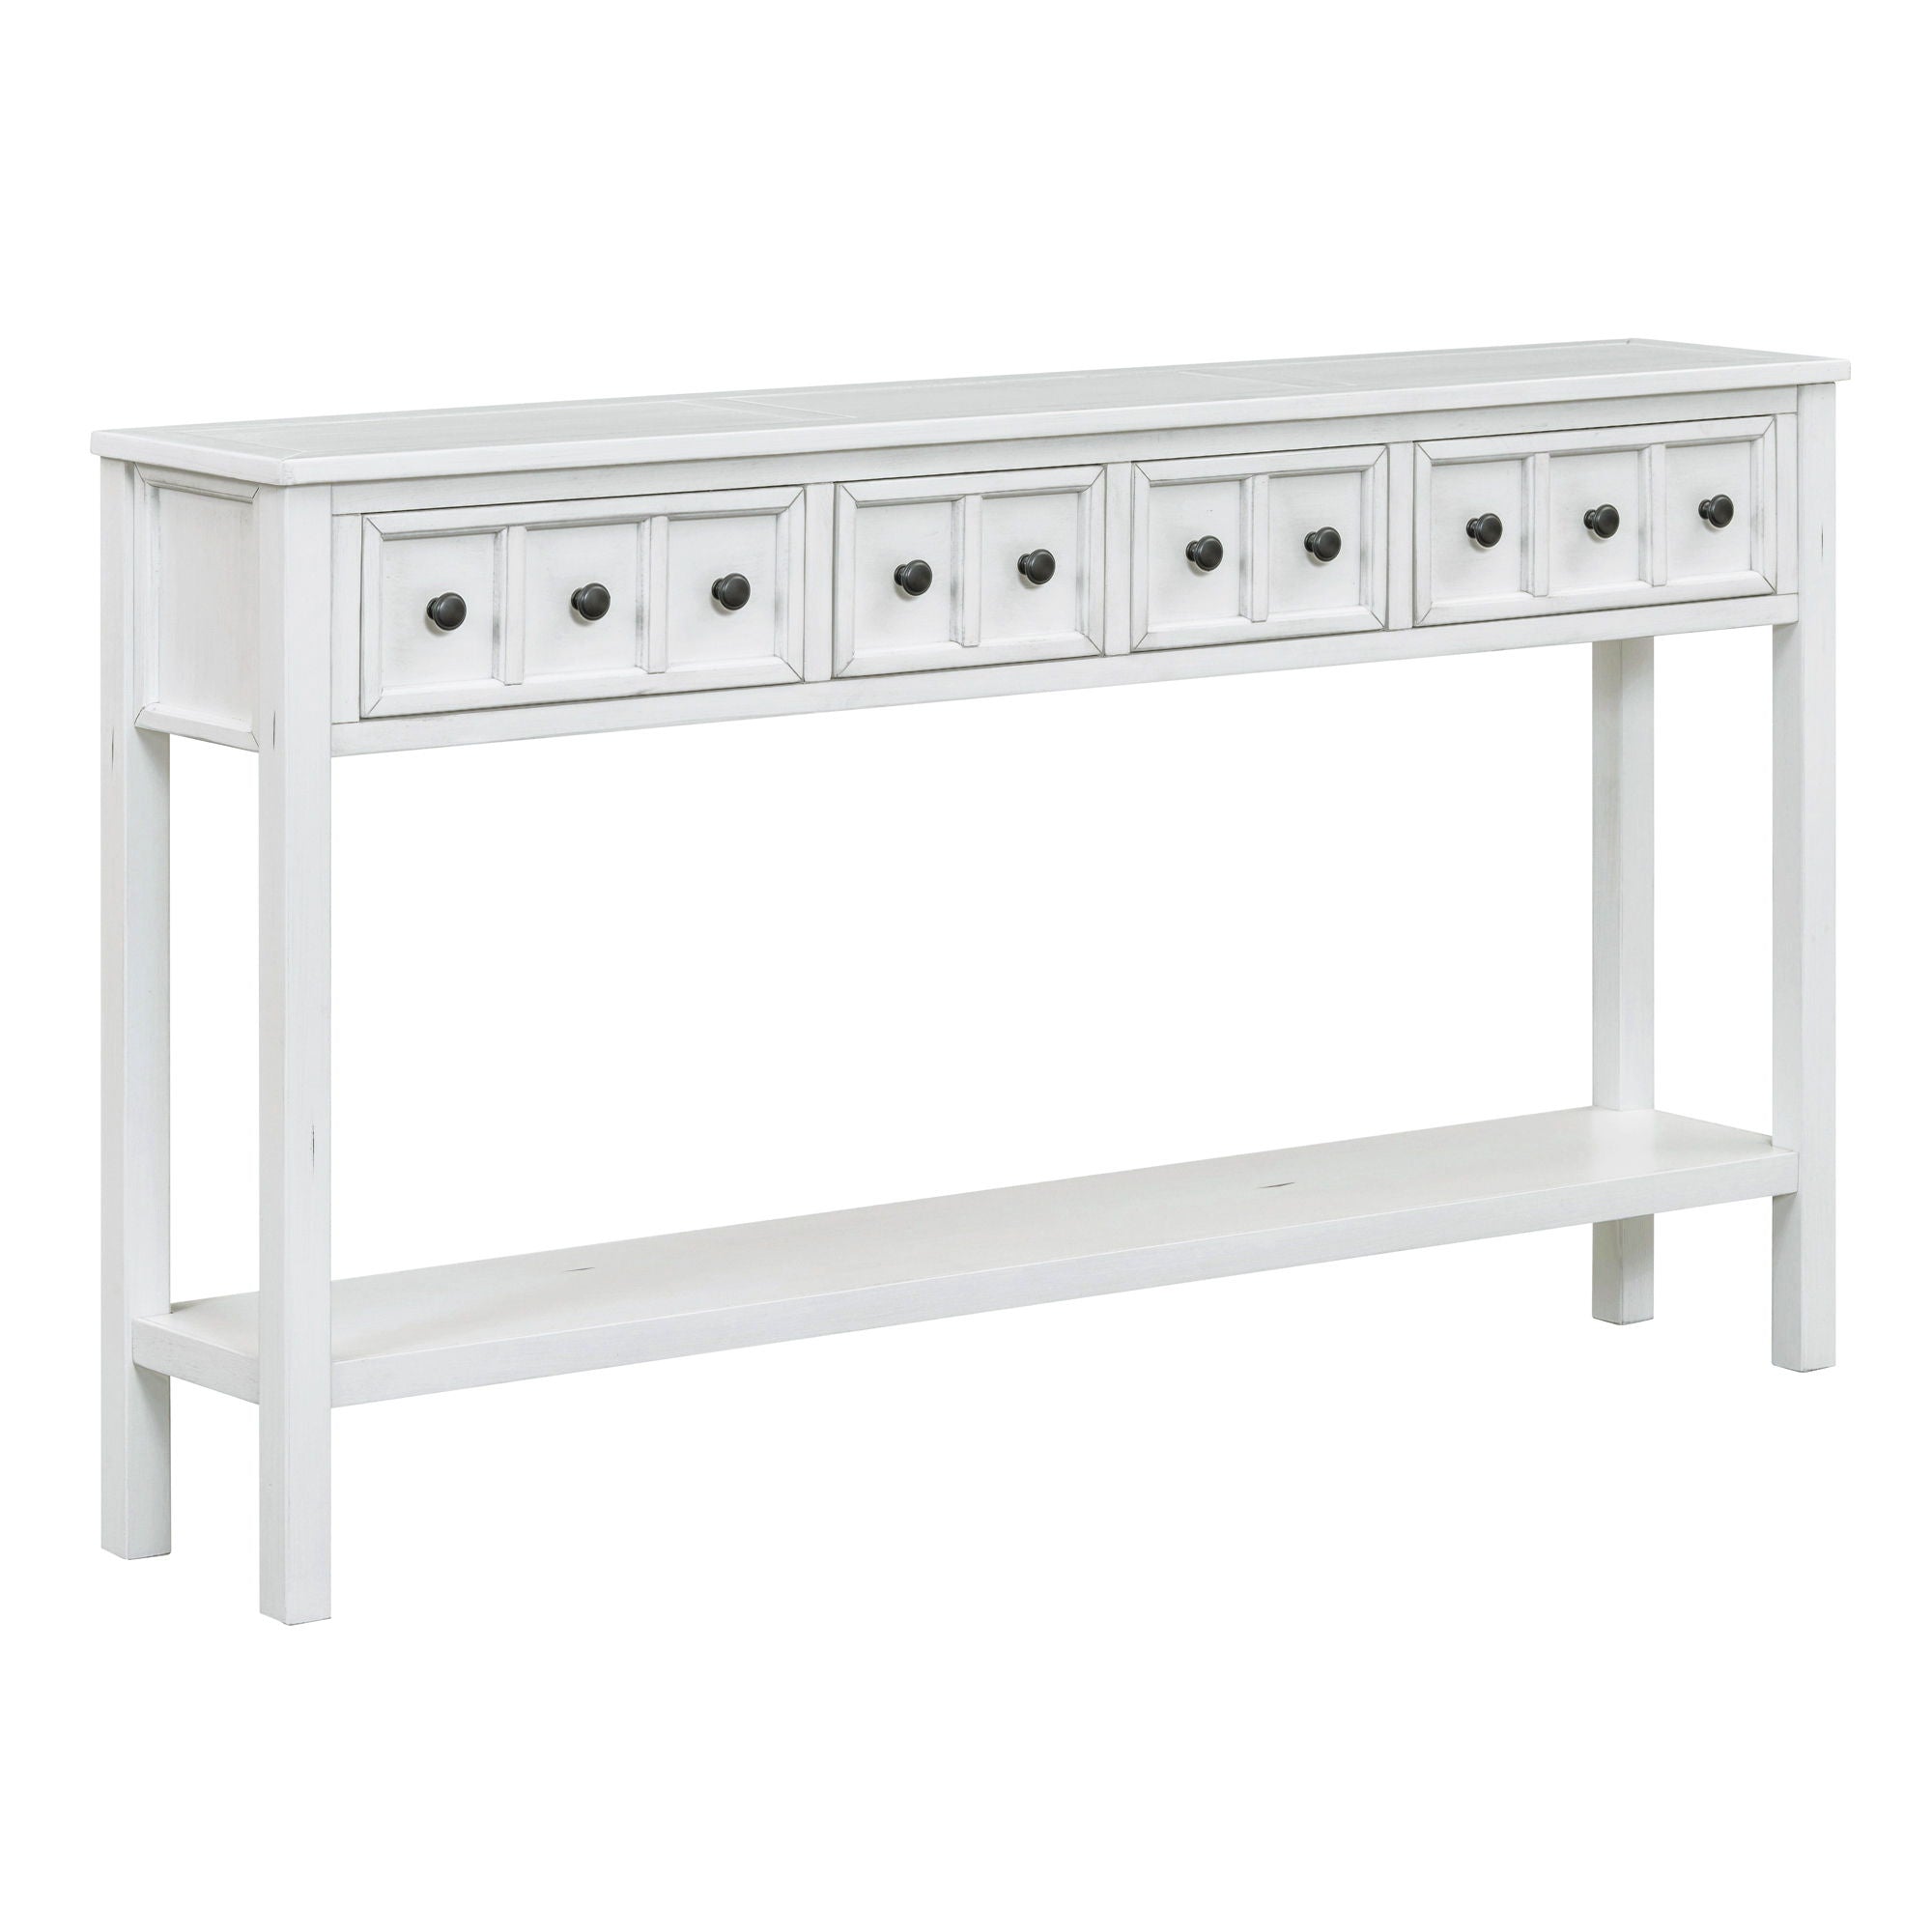 Trexm Rustic Entryway Console Table, Long Sofa Table With Two Different Size Drawers And Bottom Shelf For Storage (Antique White)